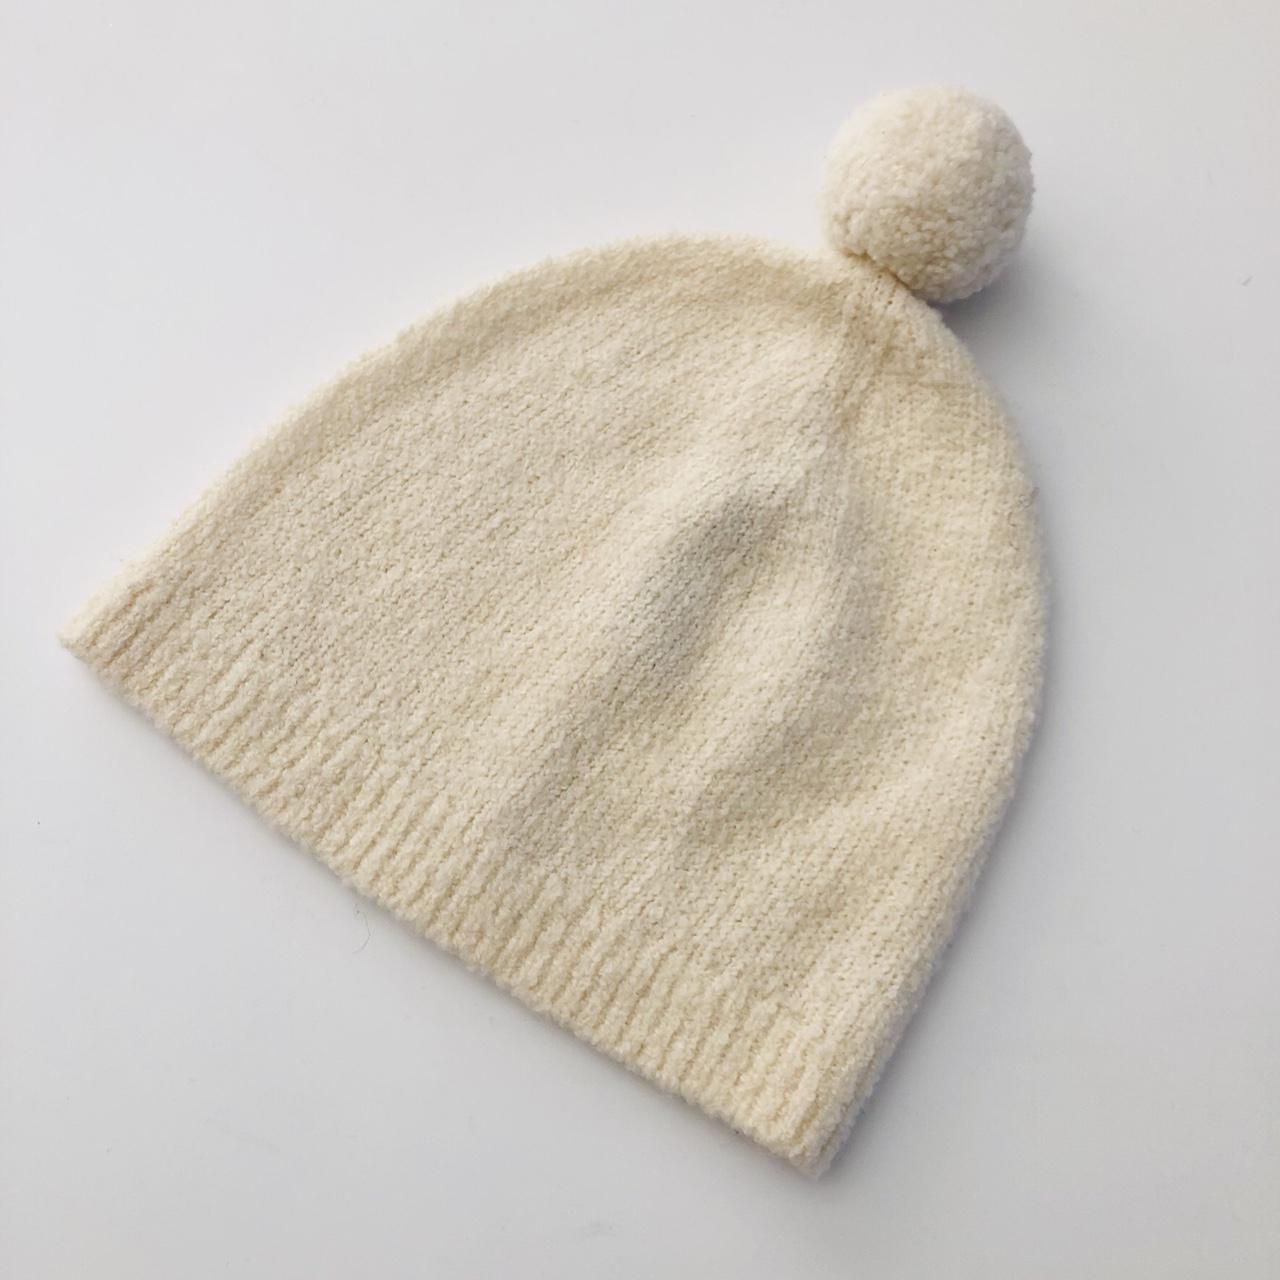 Product Image 1 - Everlane The Teddy Beanie
O/S
Excellent condition